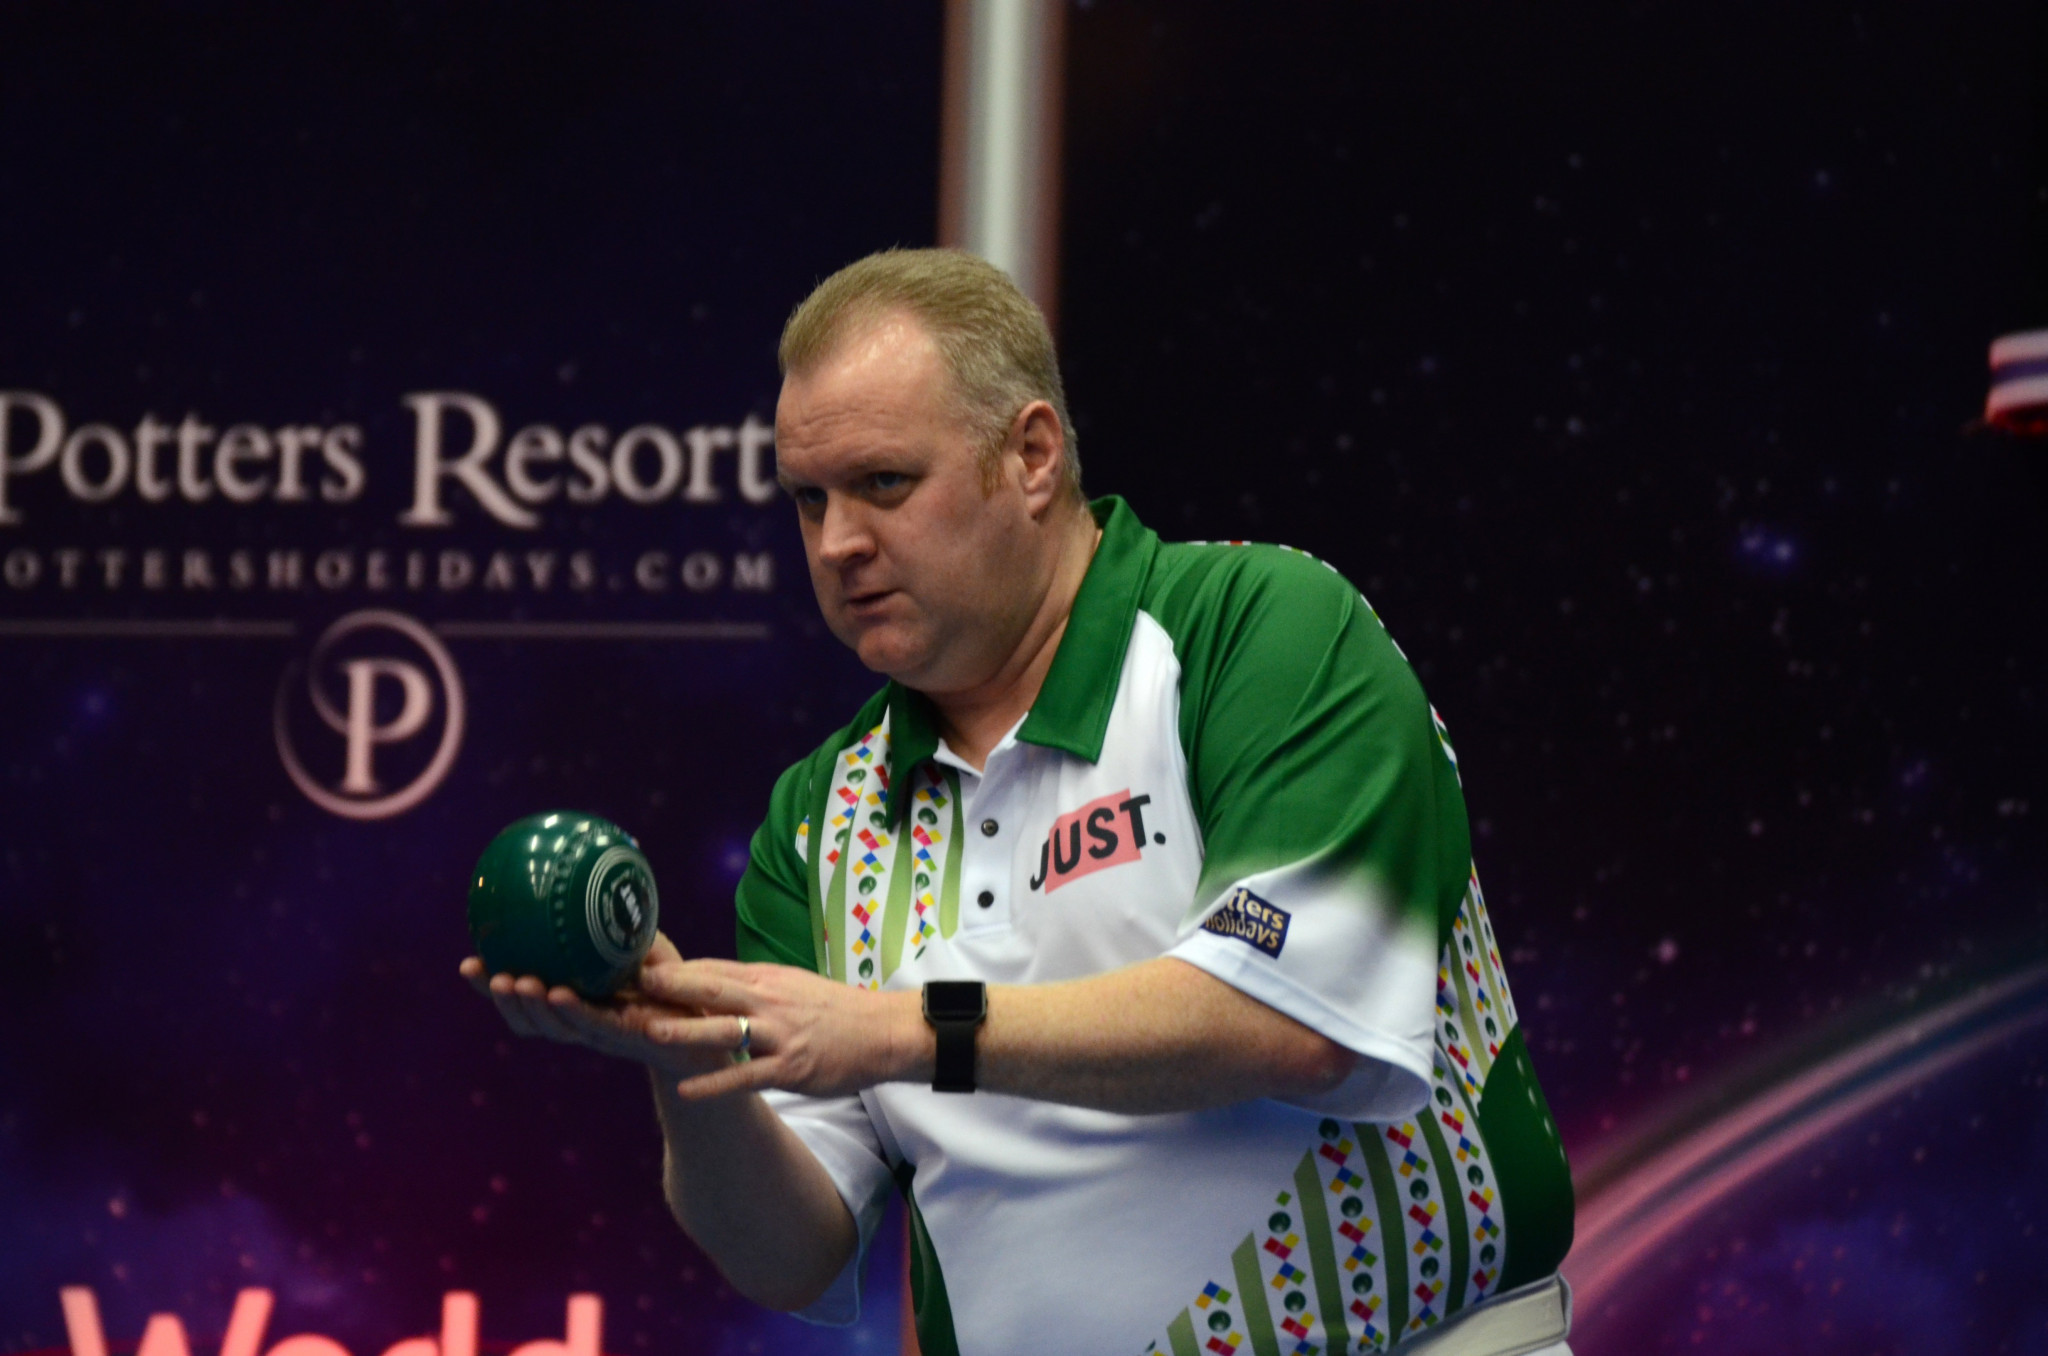 Scotland's Darren Burnett set up a meeting with England's Mark Dawes in the next round after he proved too strong for Welsh bowler Jason Greenslade ©World Bowls Tour